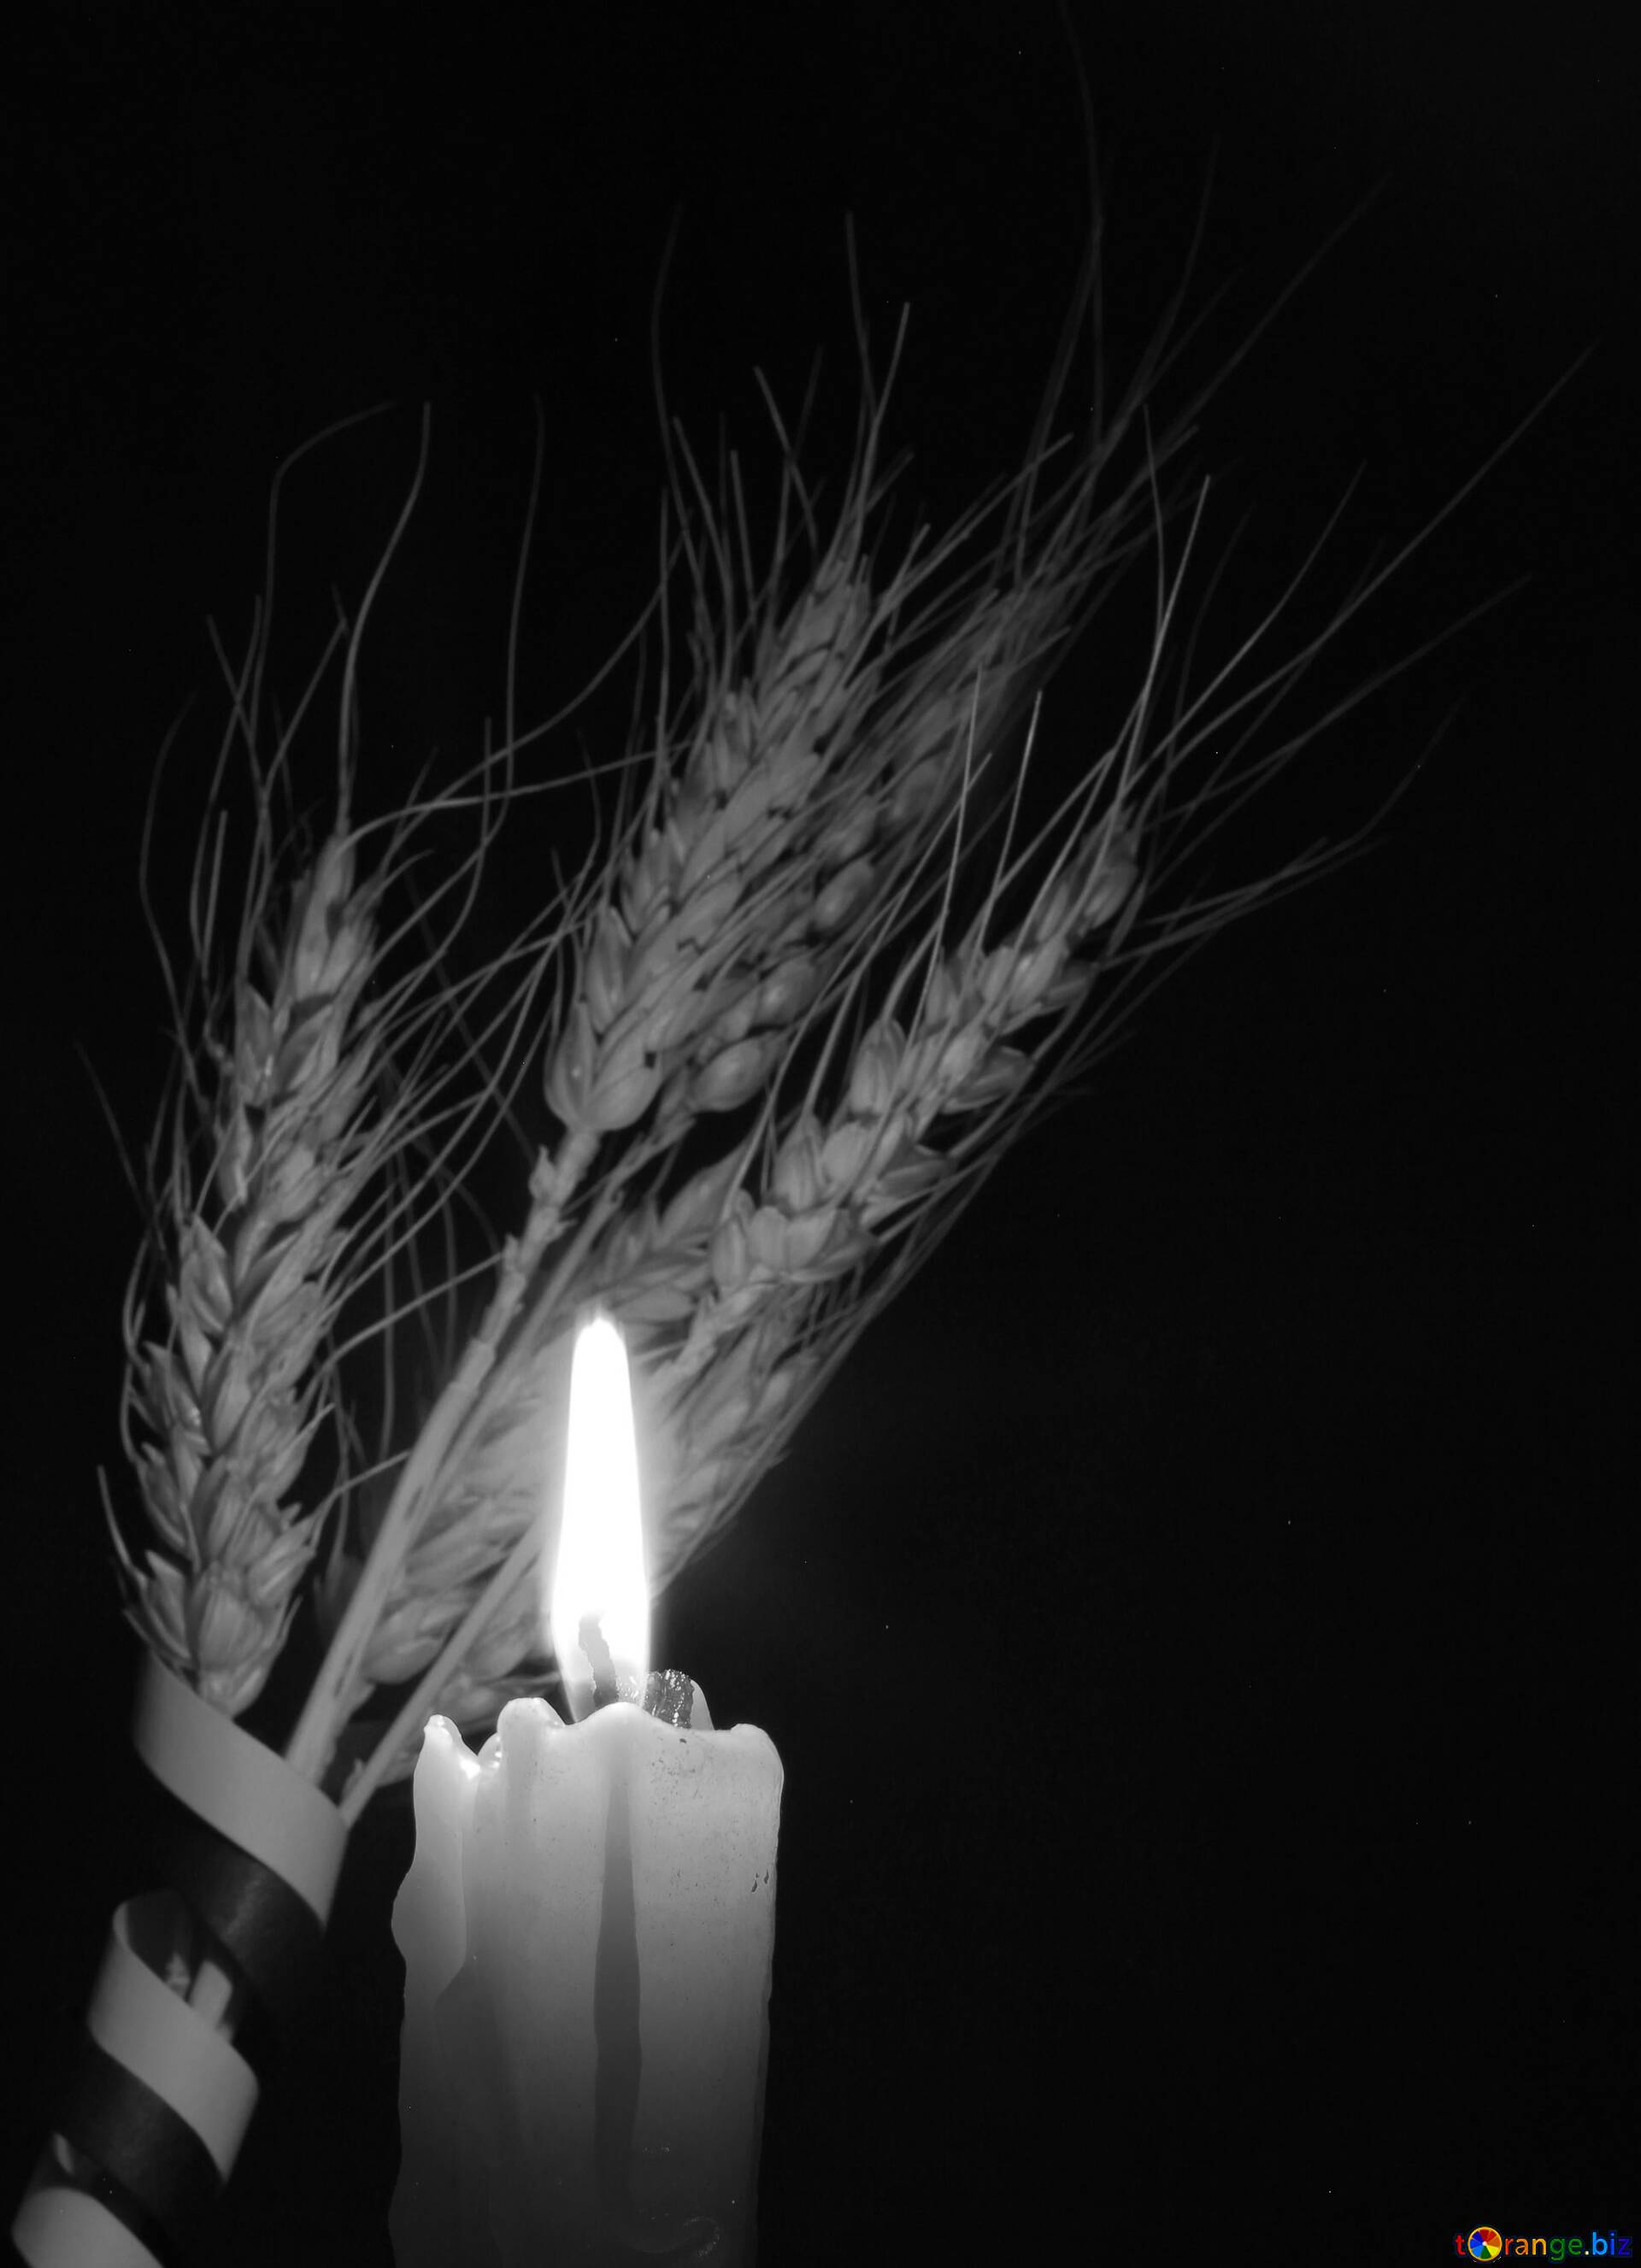 Download Free Picture Funeral Candle Black And White On CC BY License Free Image Stock TOrange.biz Fx №77648